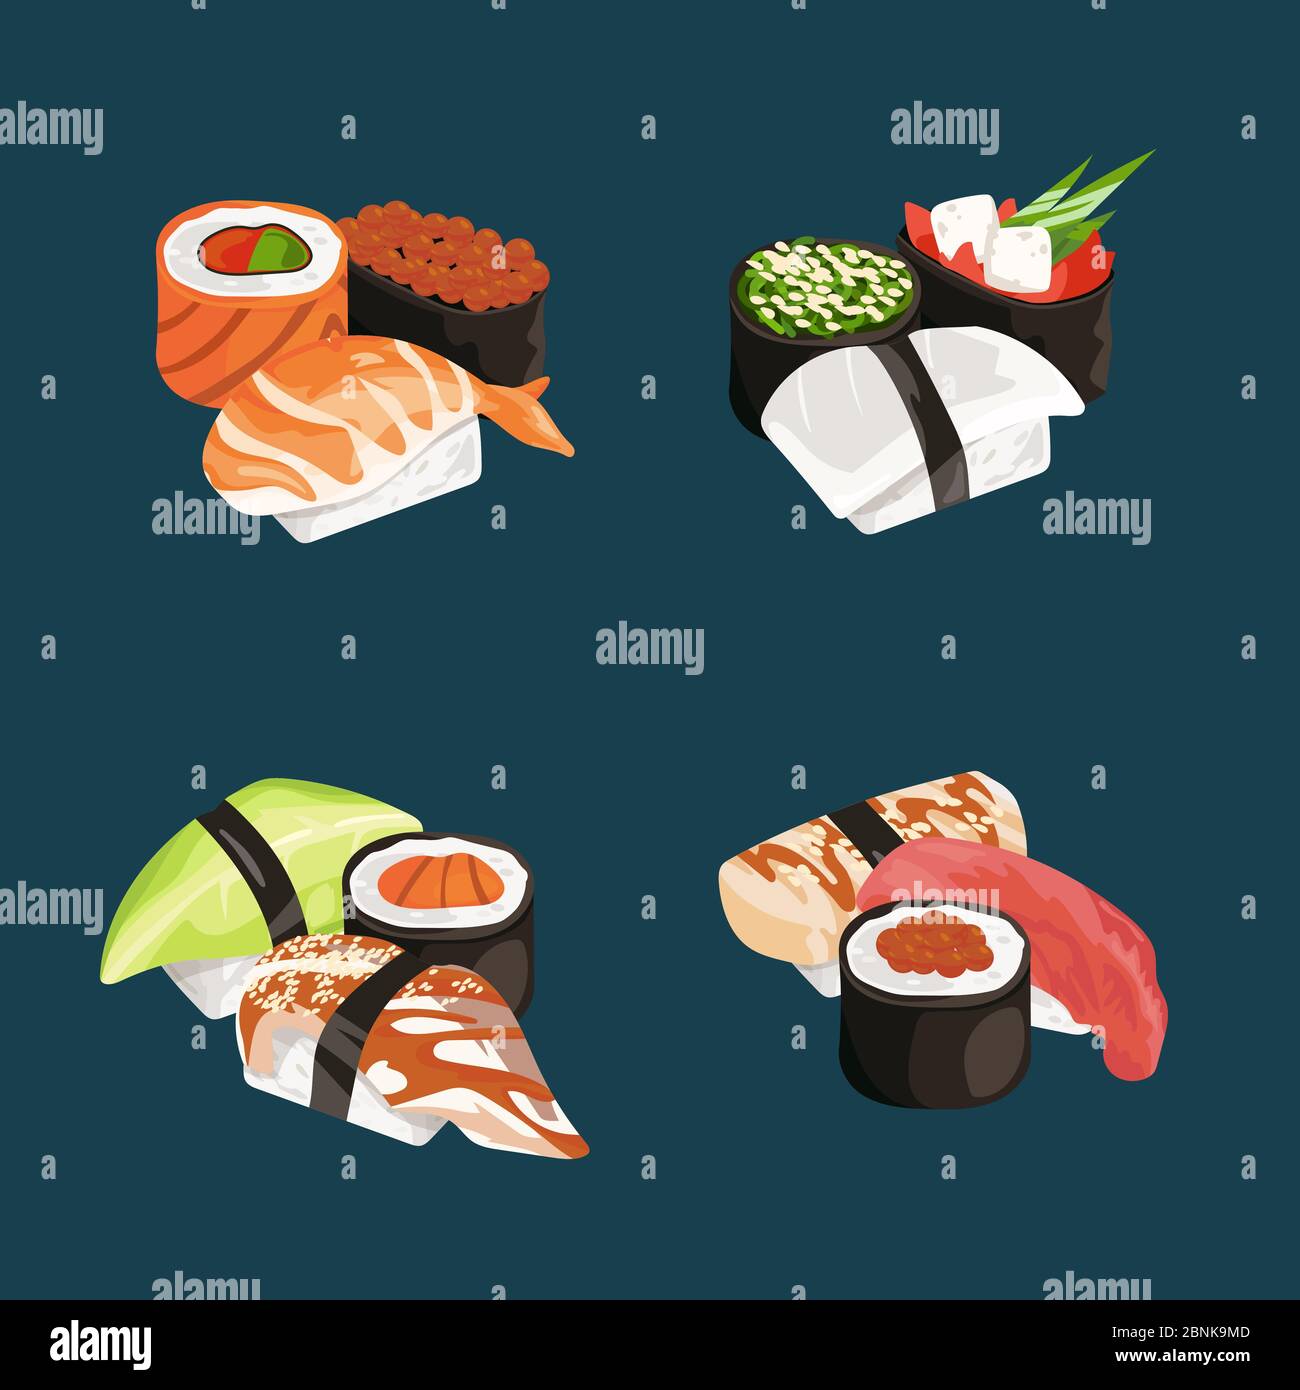 305 Sushi Roller Mat Images, Stock Photos, 3D objects, & Vectors